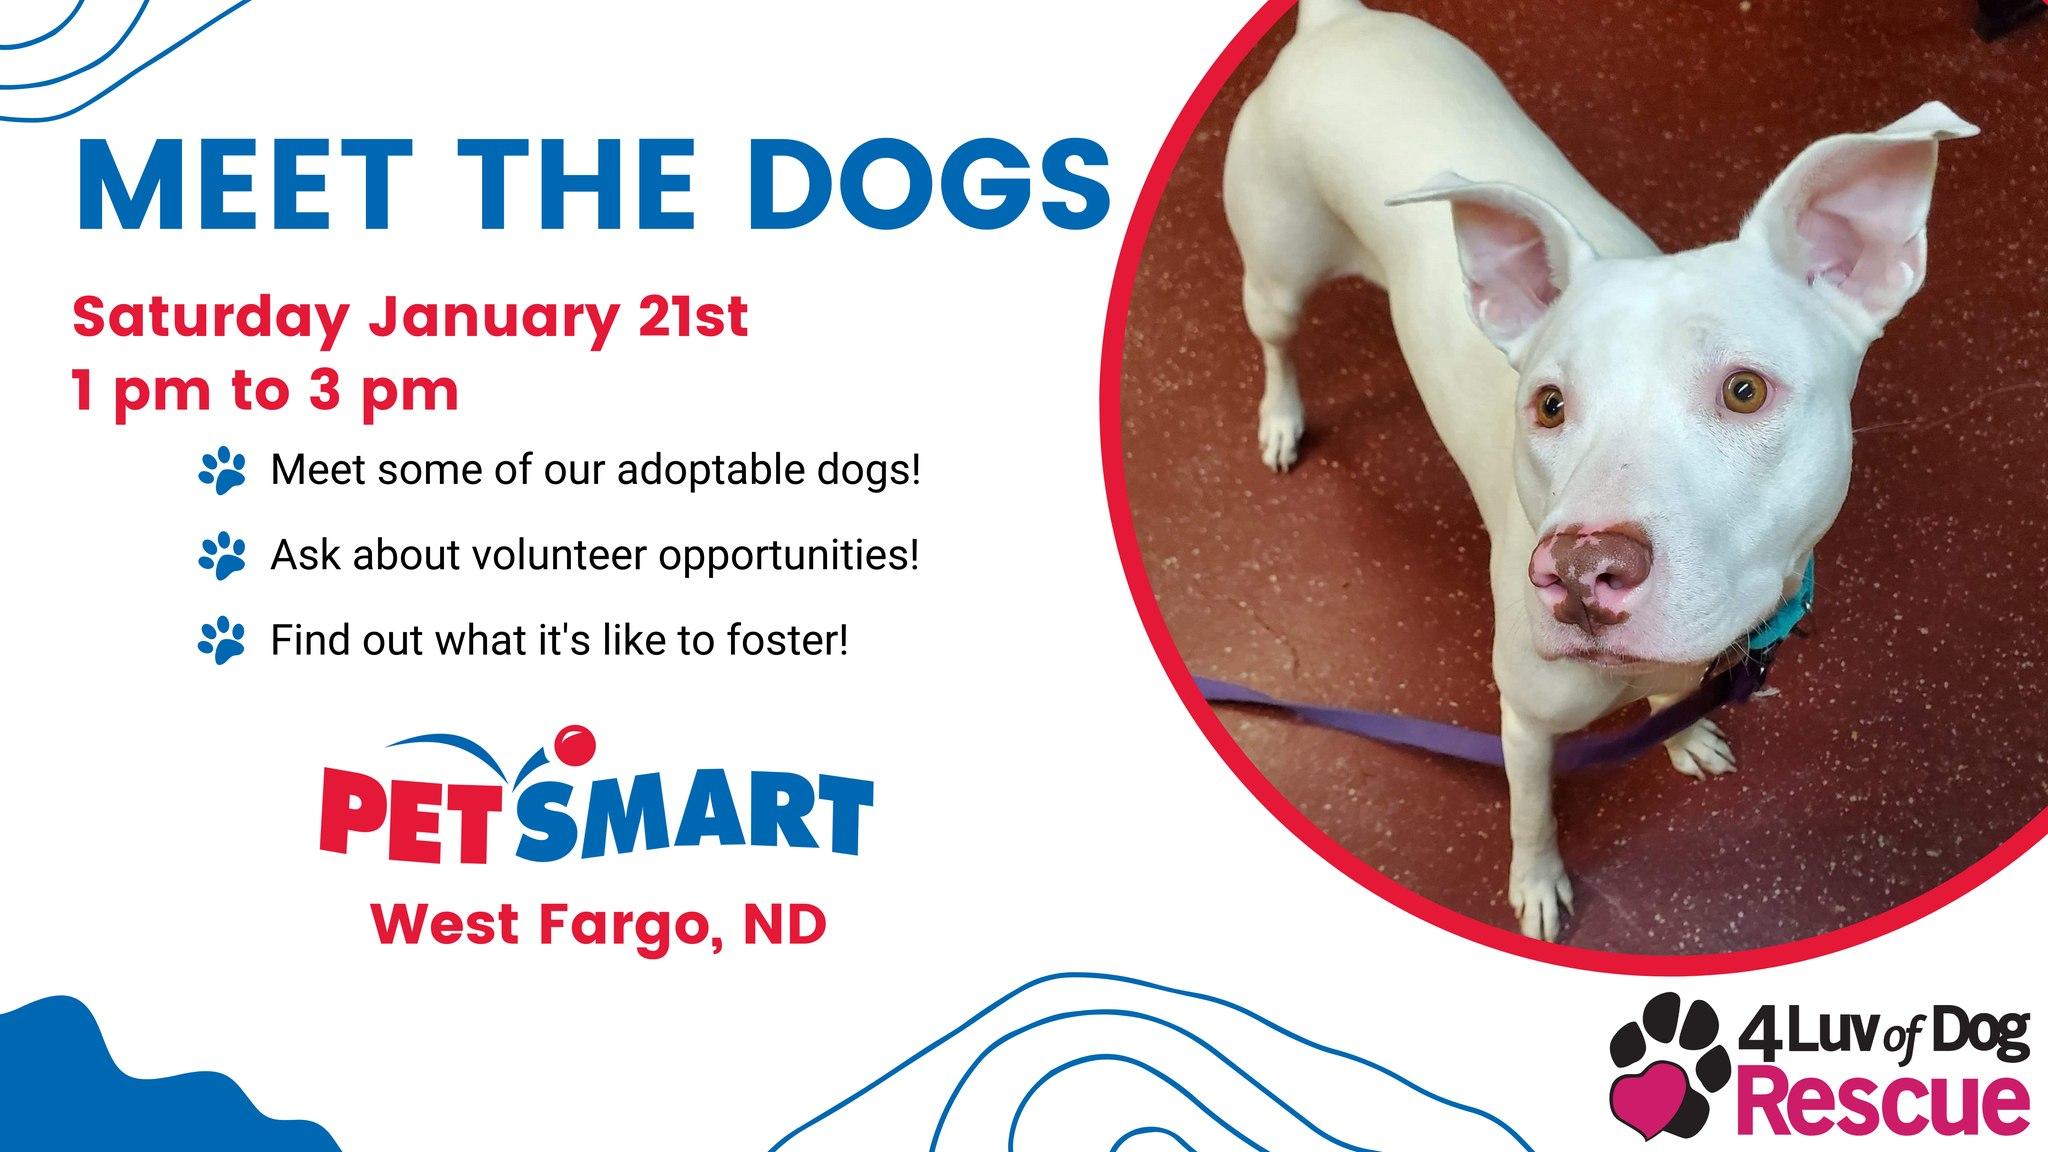 Meet the Dogs - West Fargo, ND PetSmart Event - January 21 1-3 pm